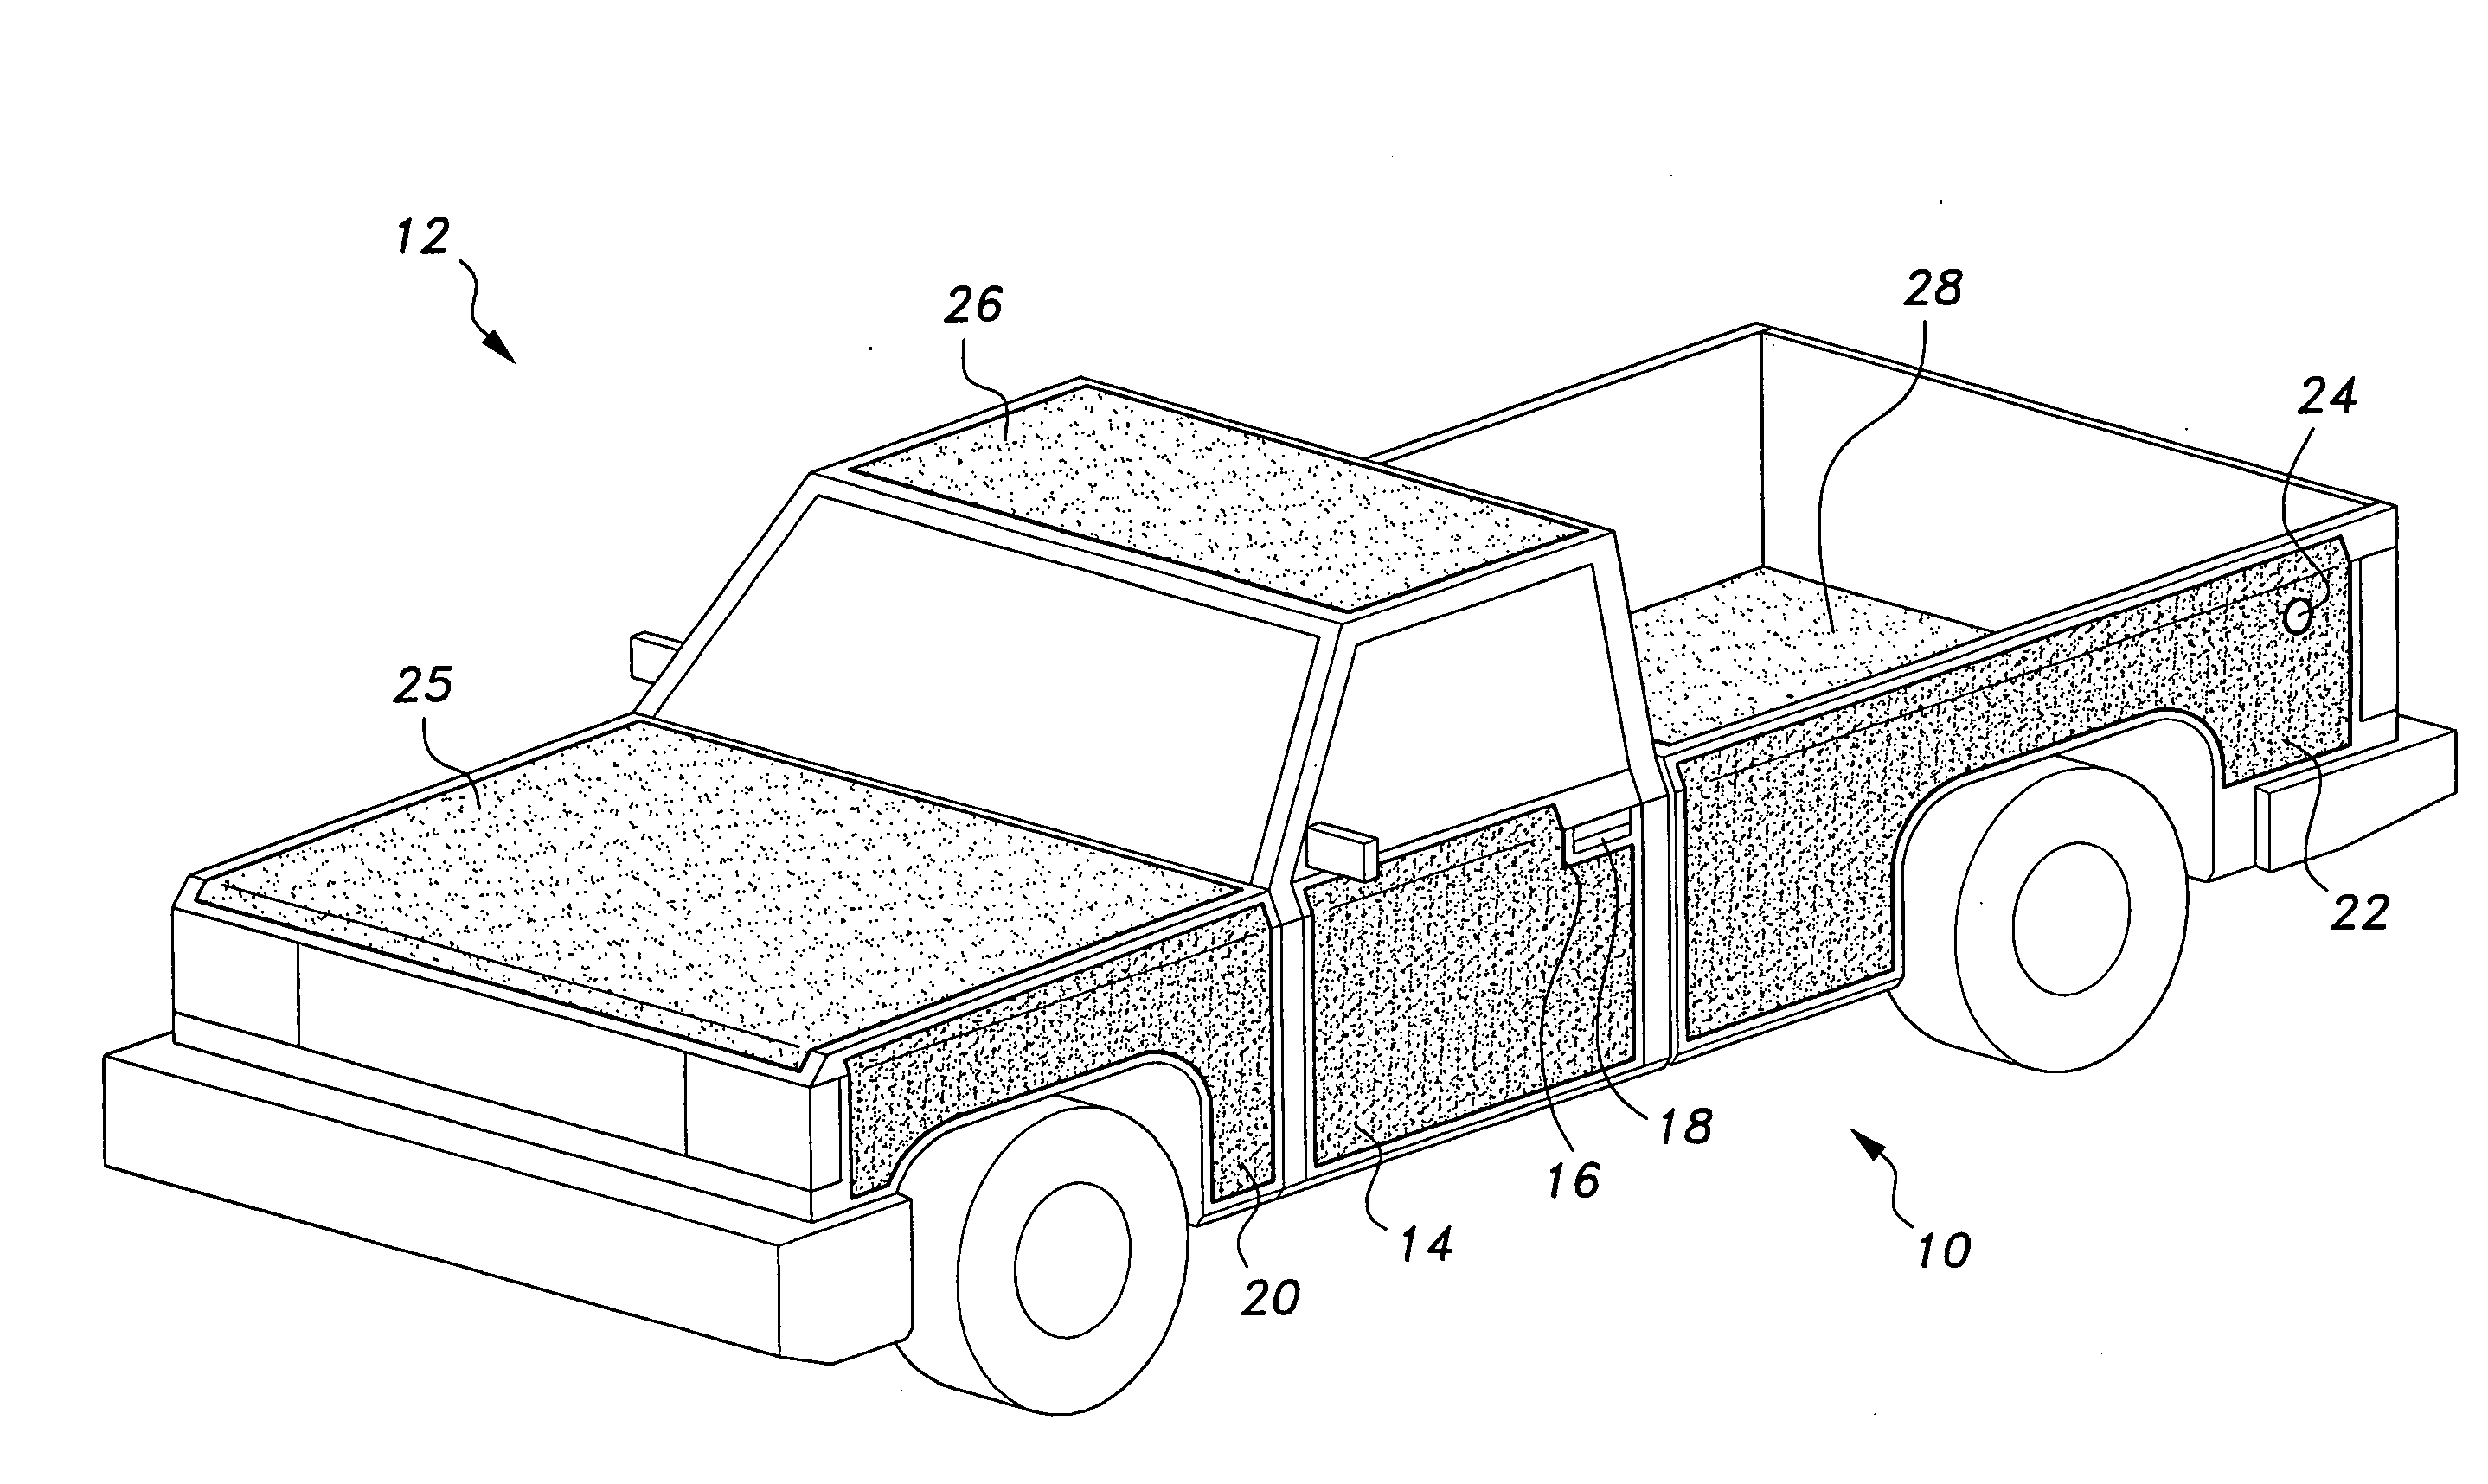 Vehicle protection assembly